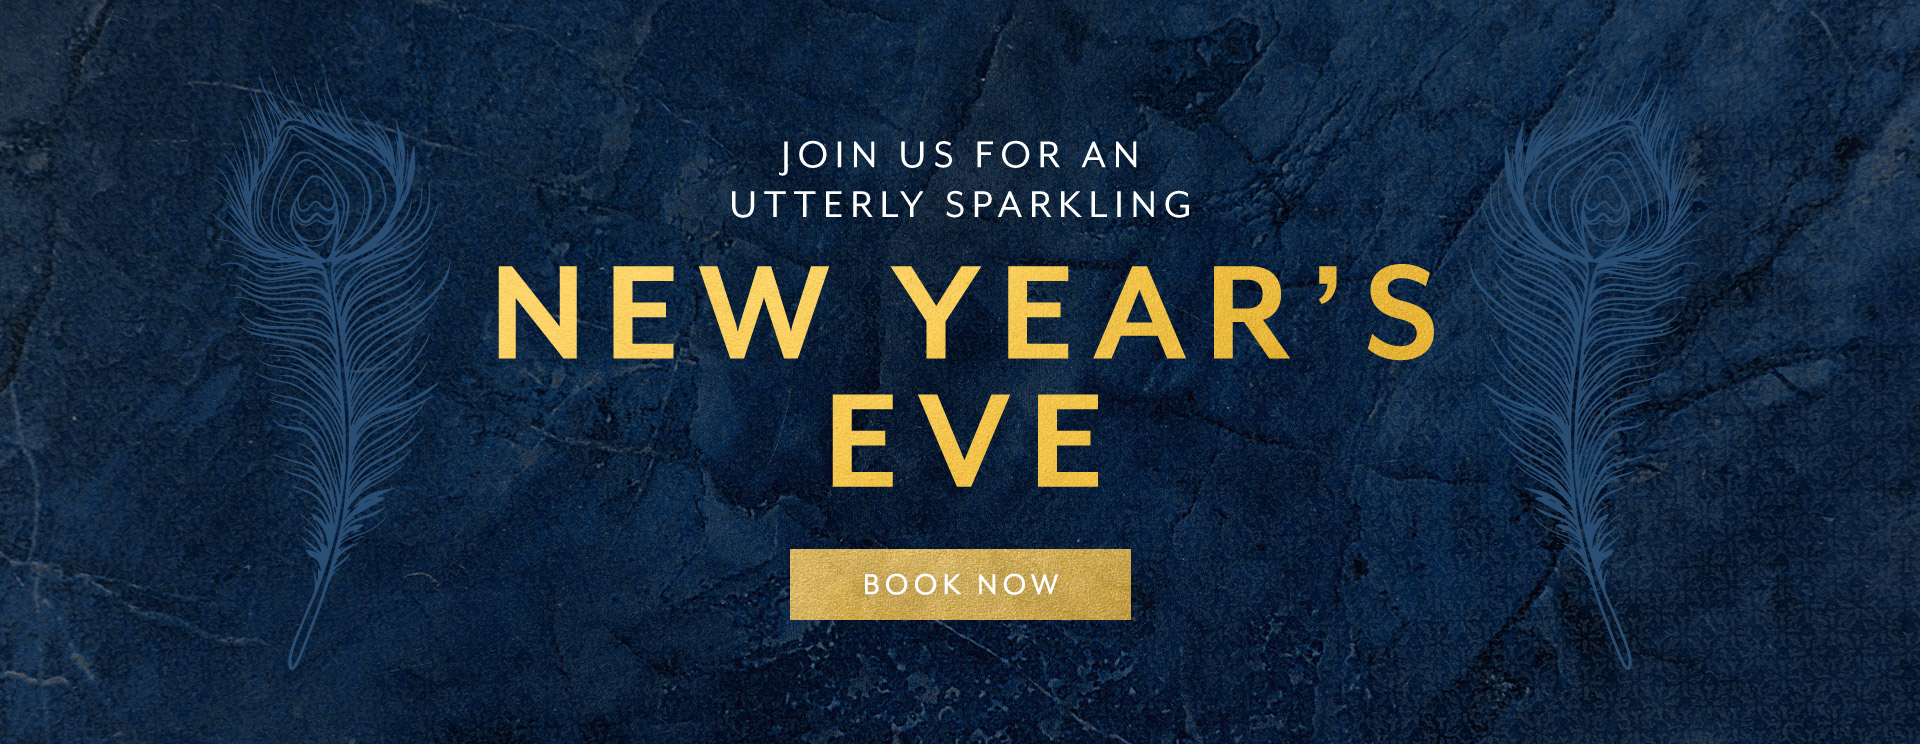 New Year's Eve at The White Hart